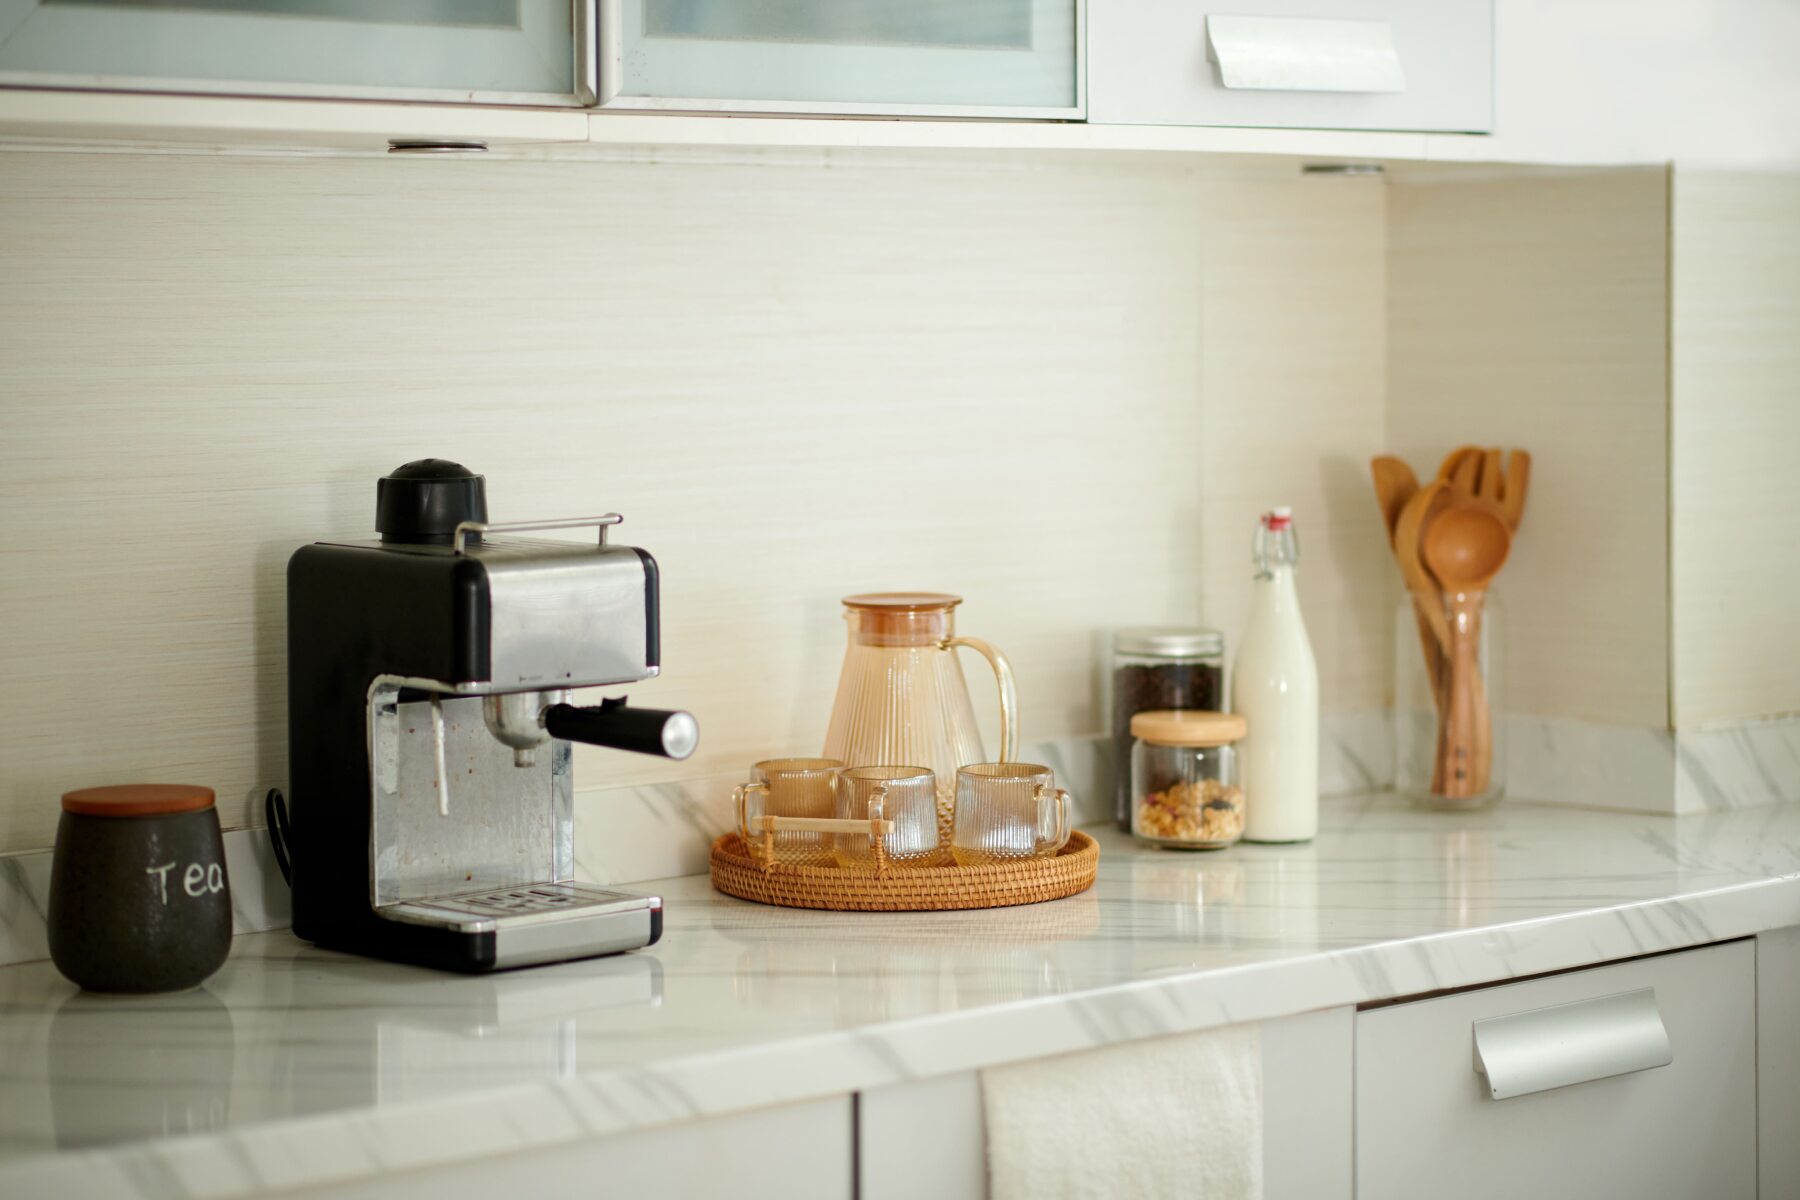 coffee station on kitchen counter